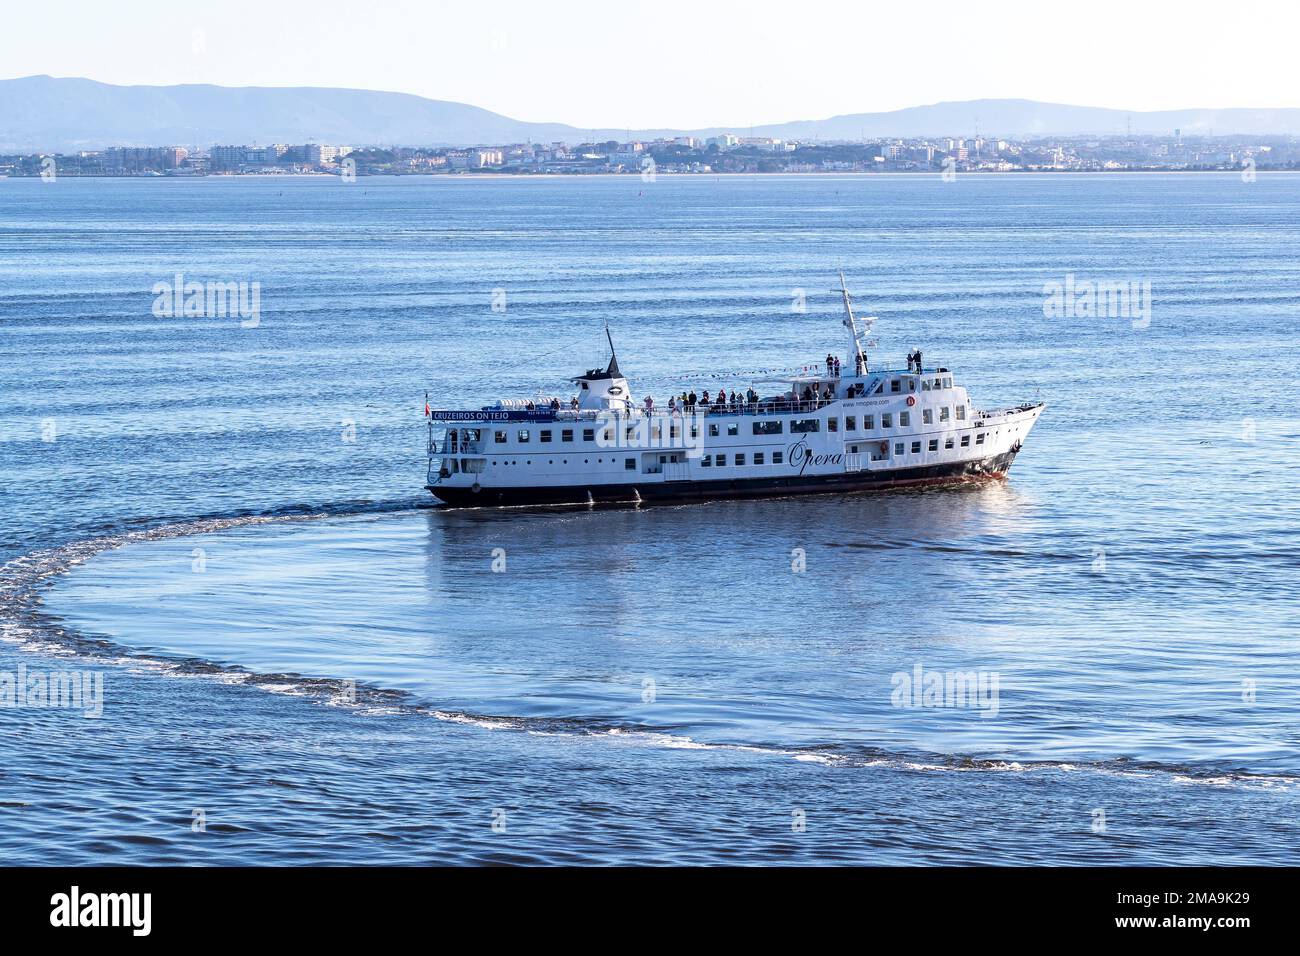 Ferry just leaving the harbour, Lisbon, Portugal. Stock Photo